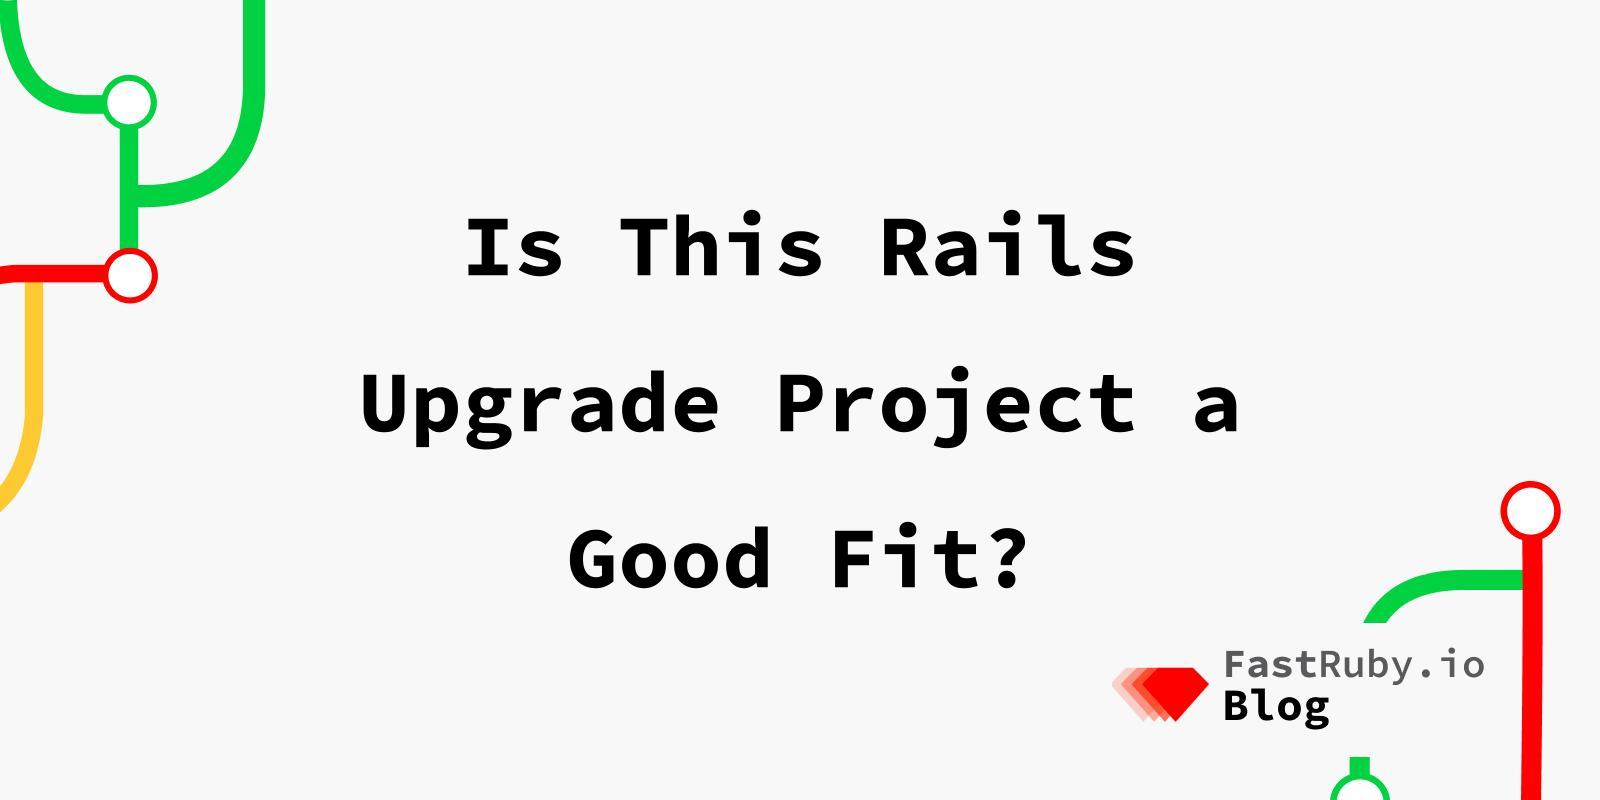 Is This Rails Upgrade Project a Good Fit?